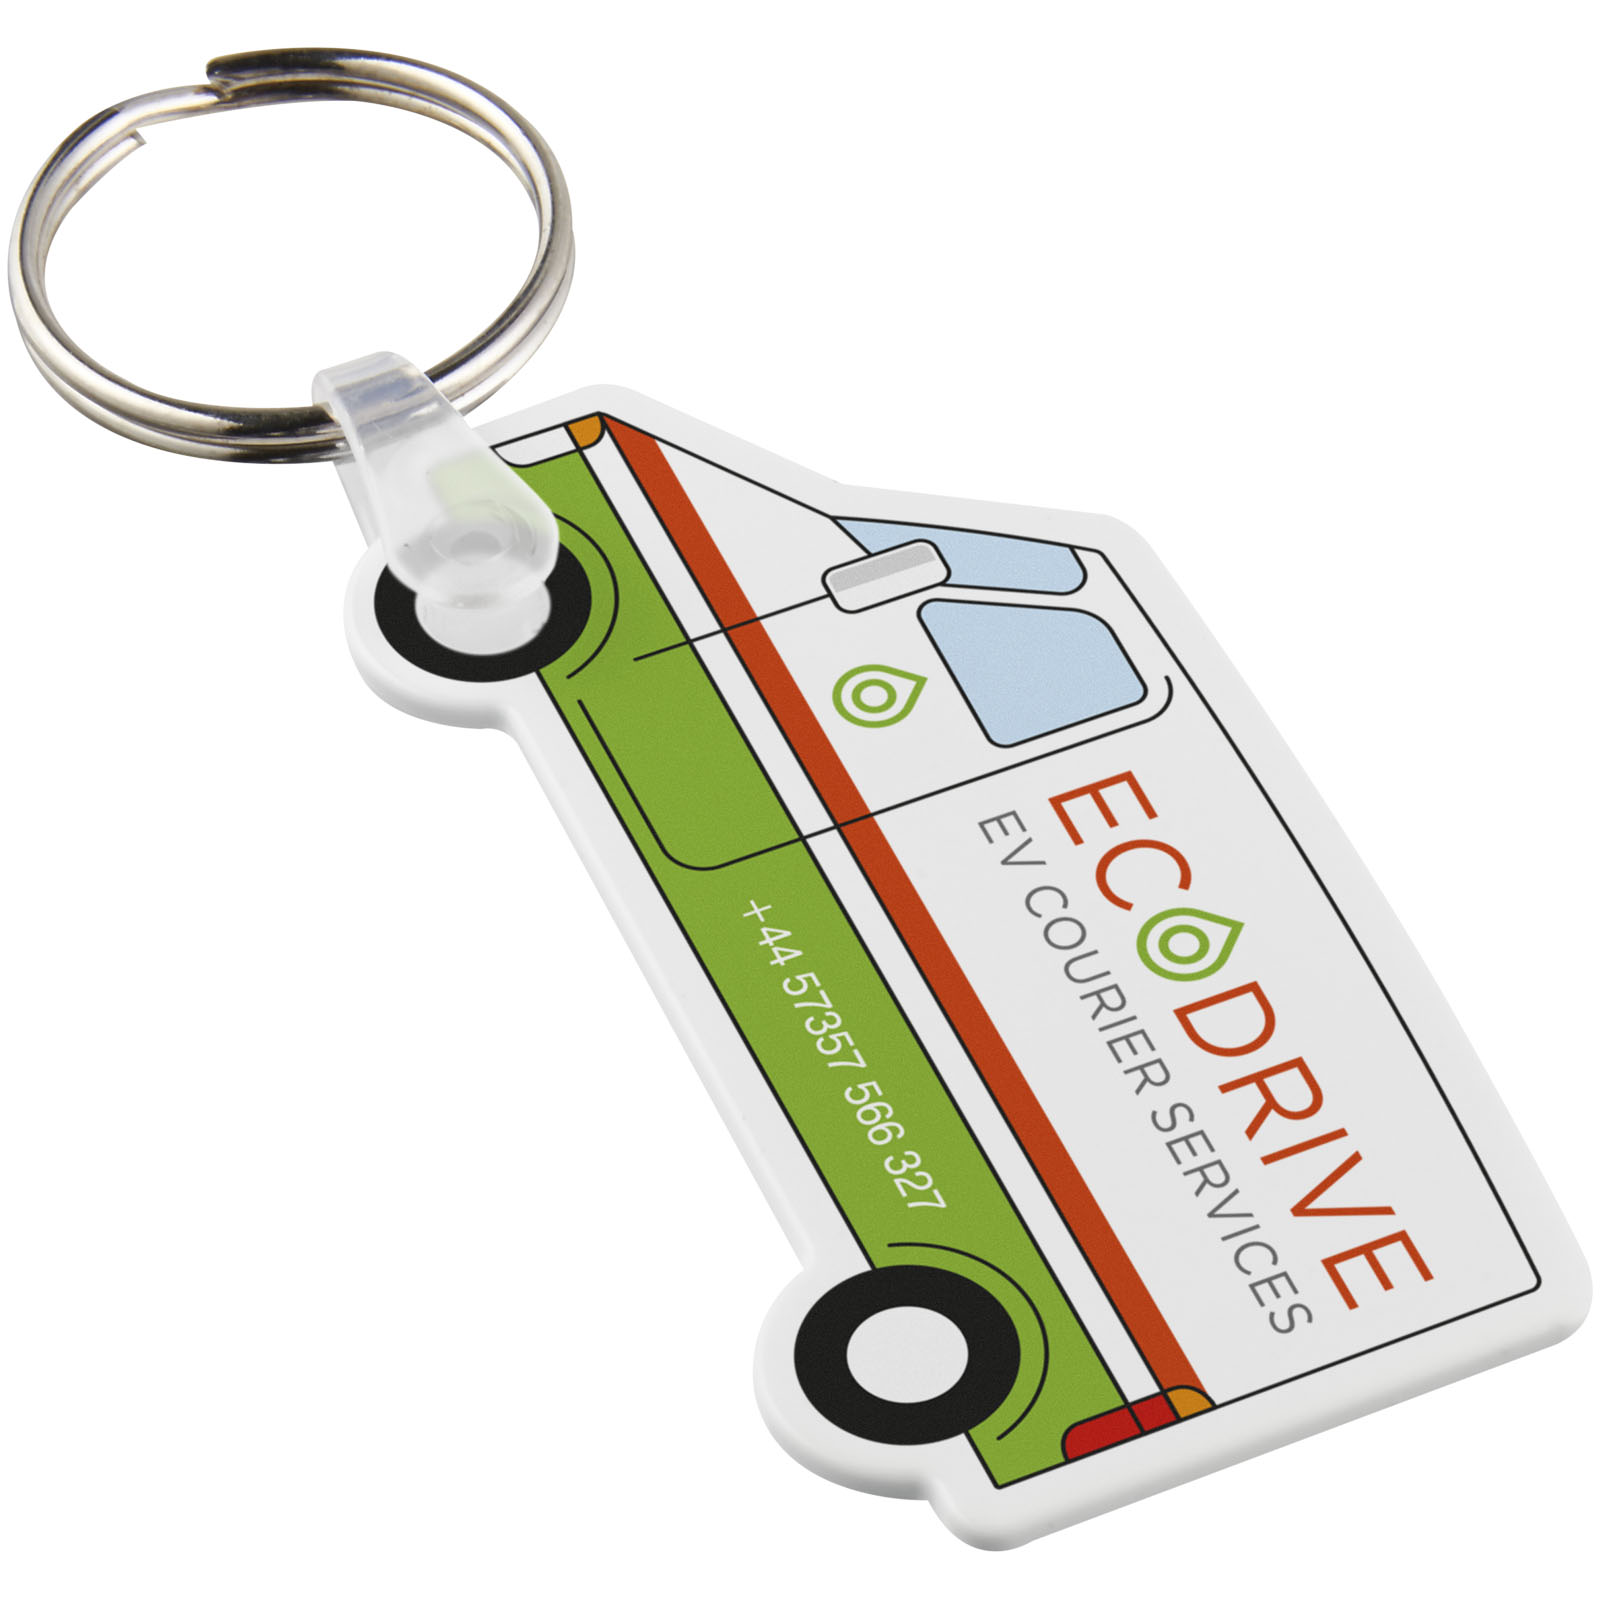 Giveaways - Tait van-shaped recycled keychain